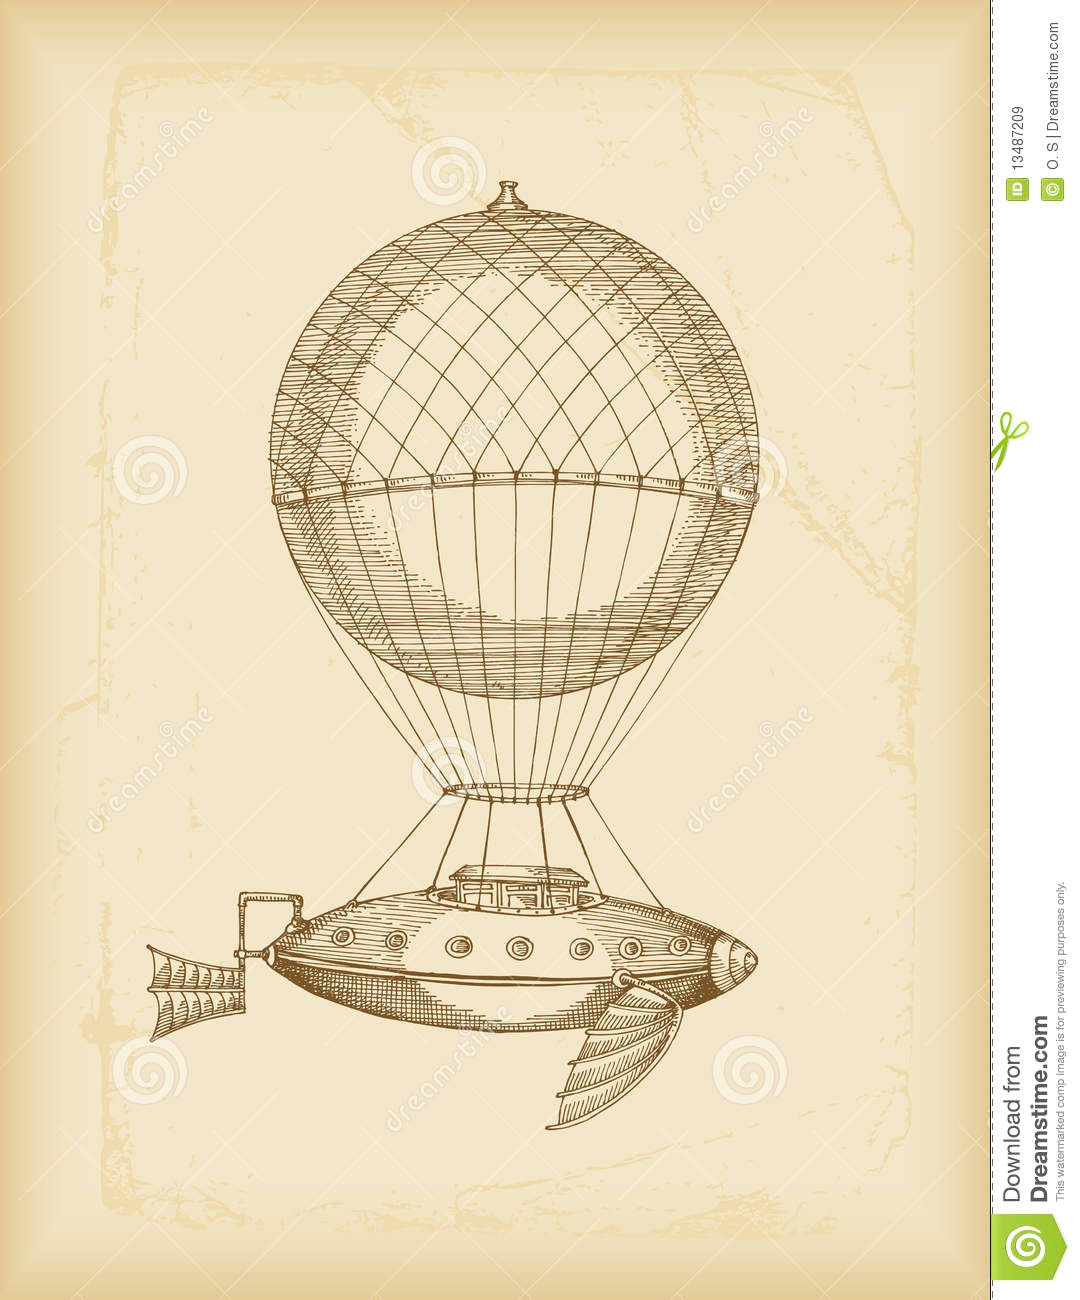 Easy Hot Air Balloon Drawing Flying Machine Sketch Stock Vector Illustration Of Bizarre